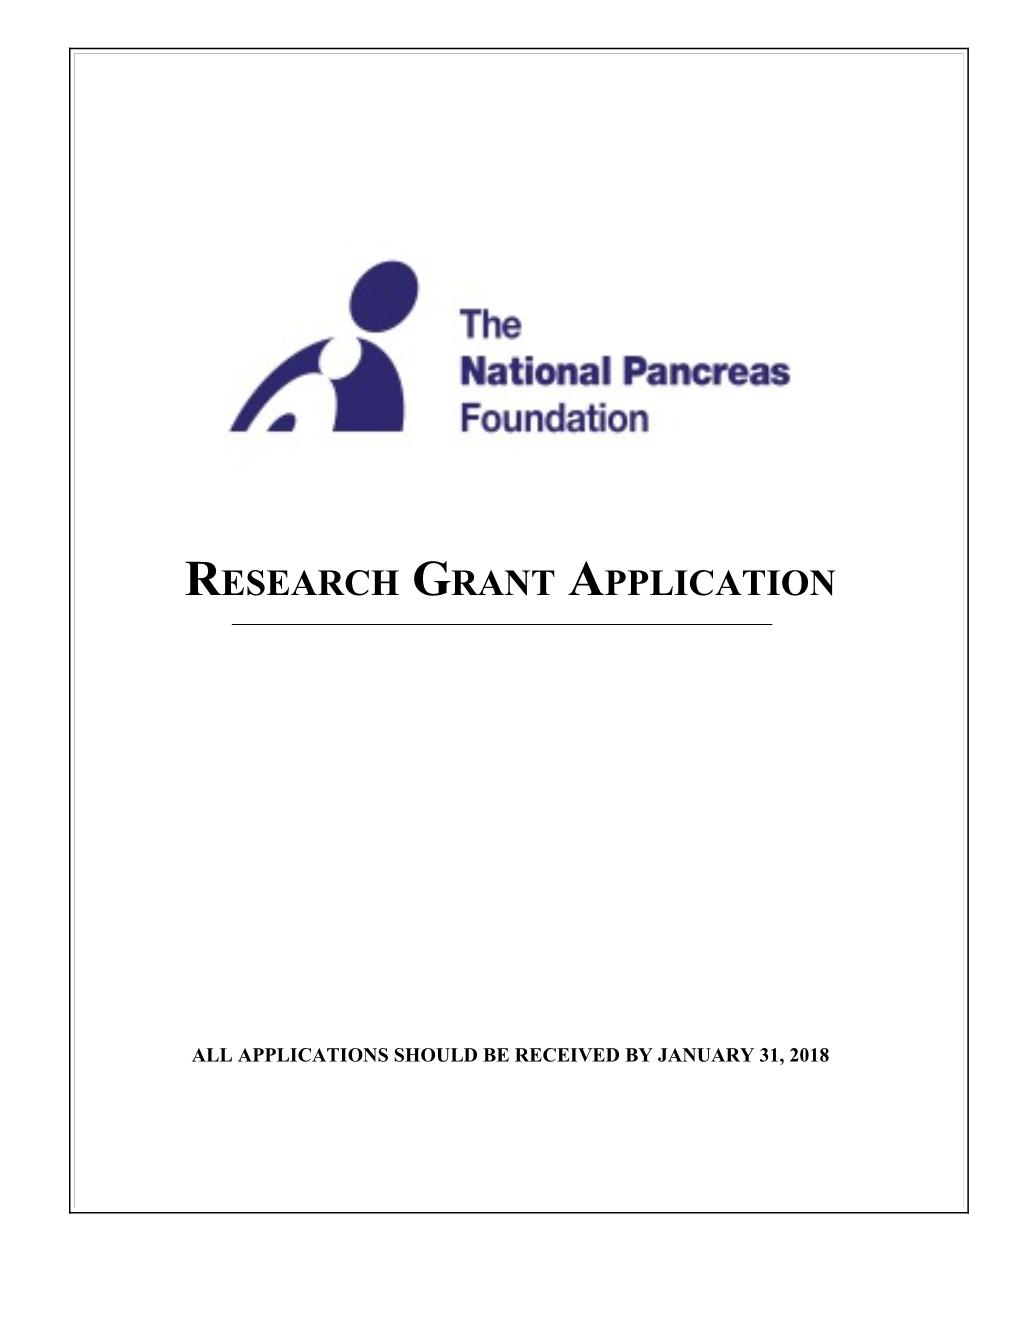 General Guidelines and Policies for Grant Submission